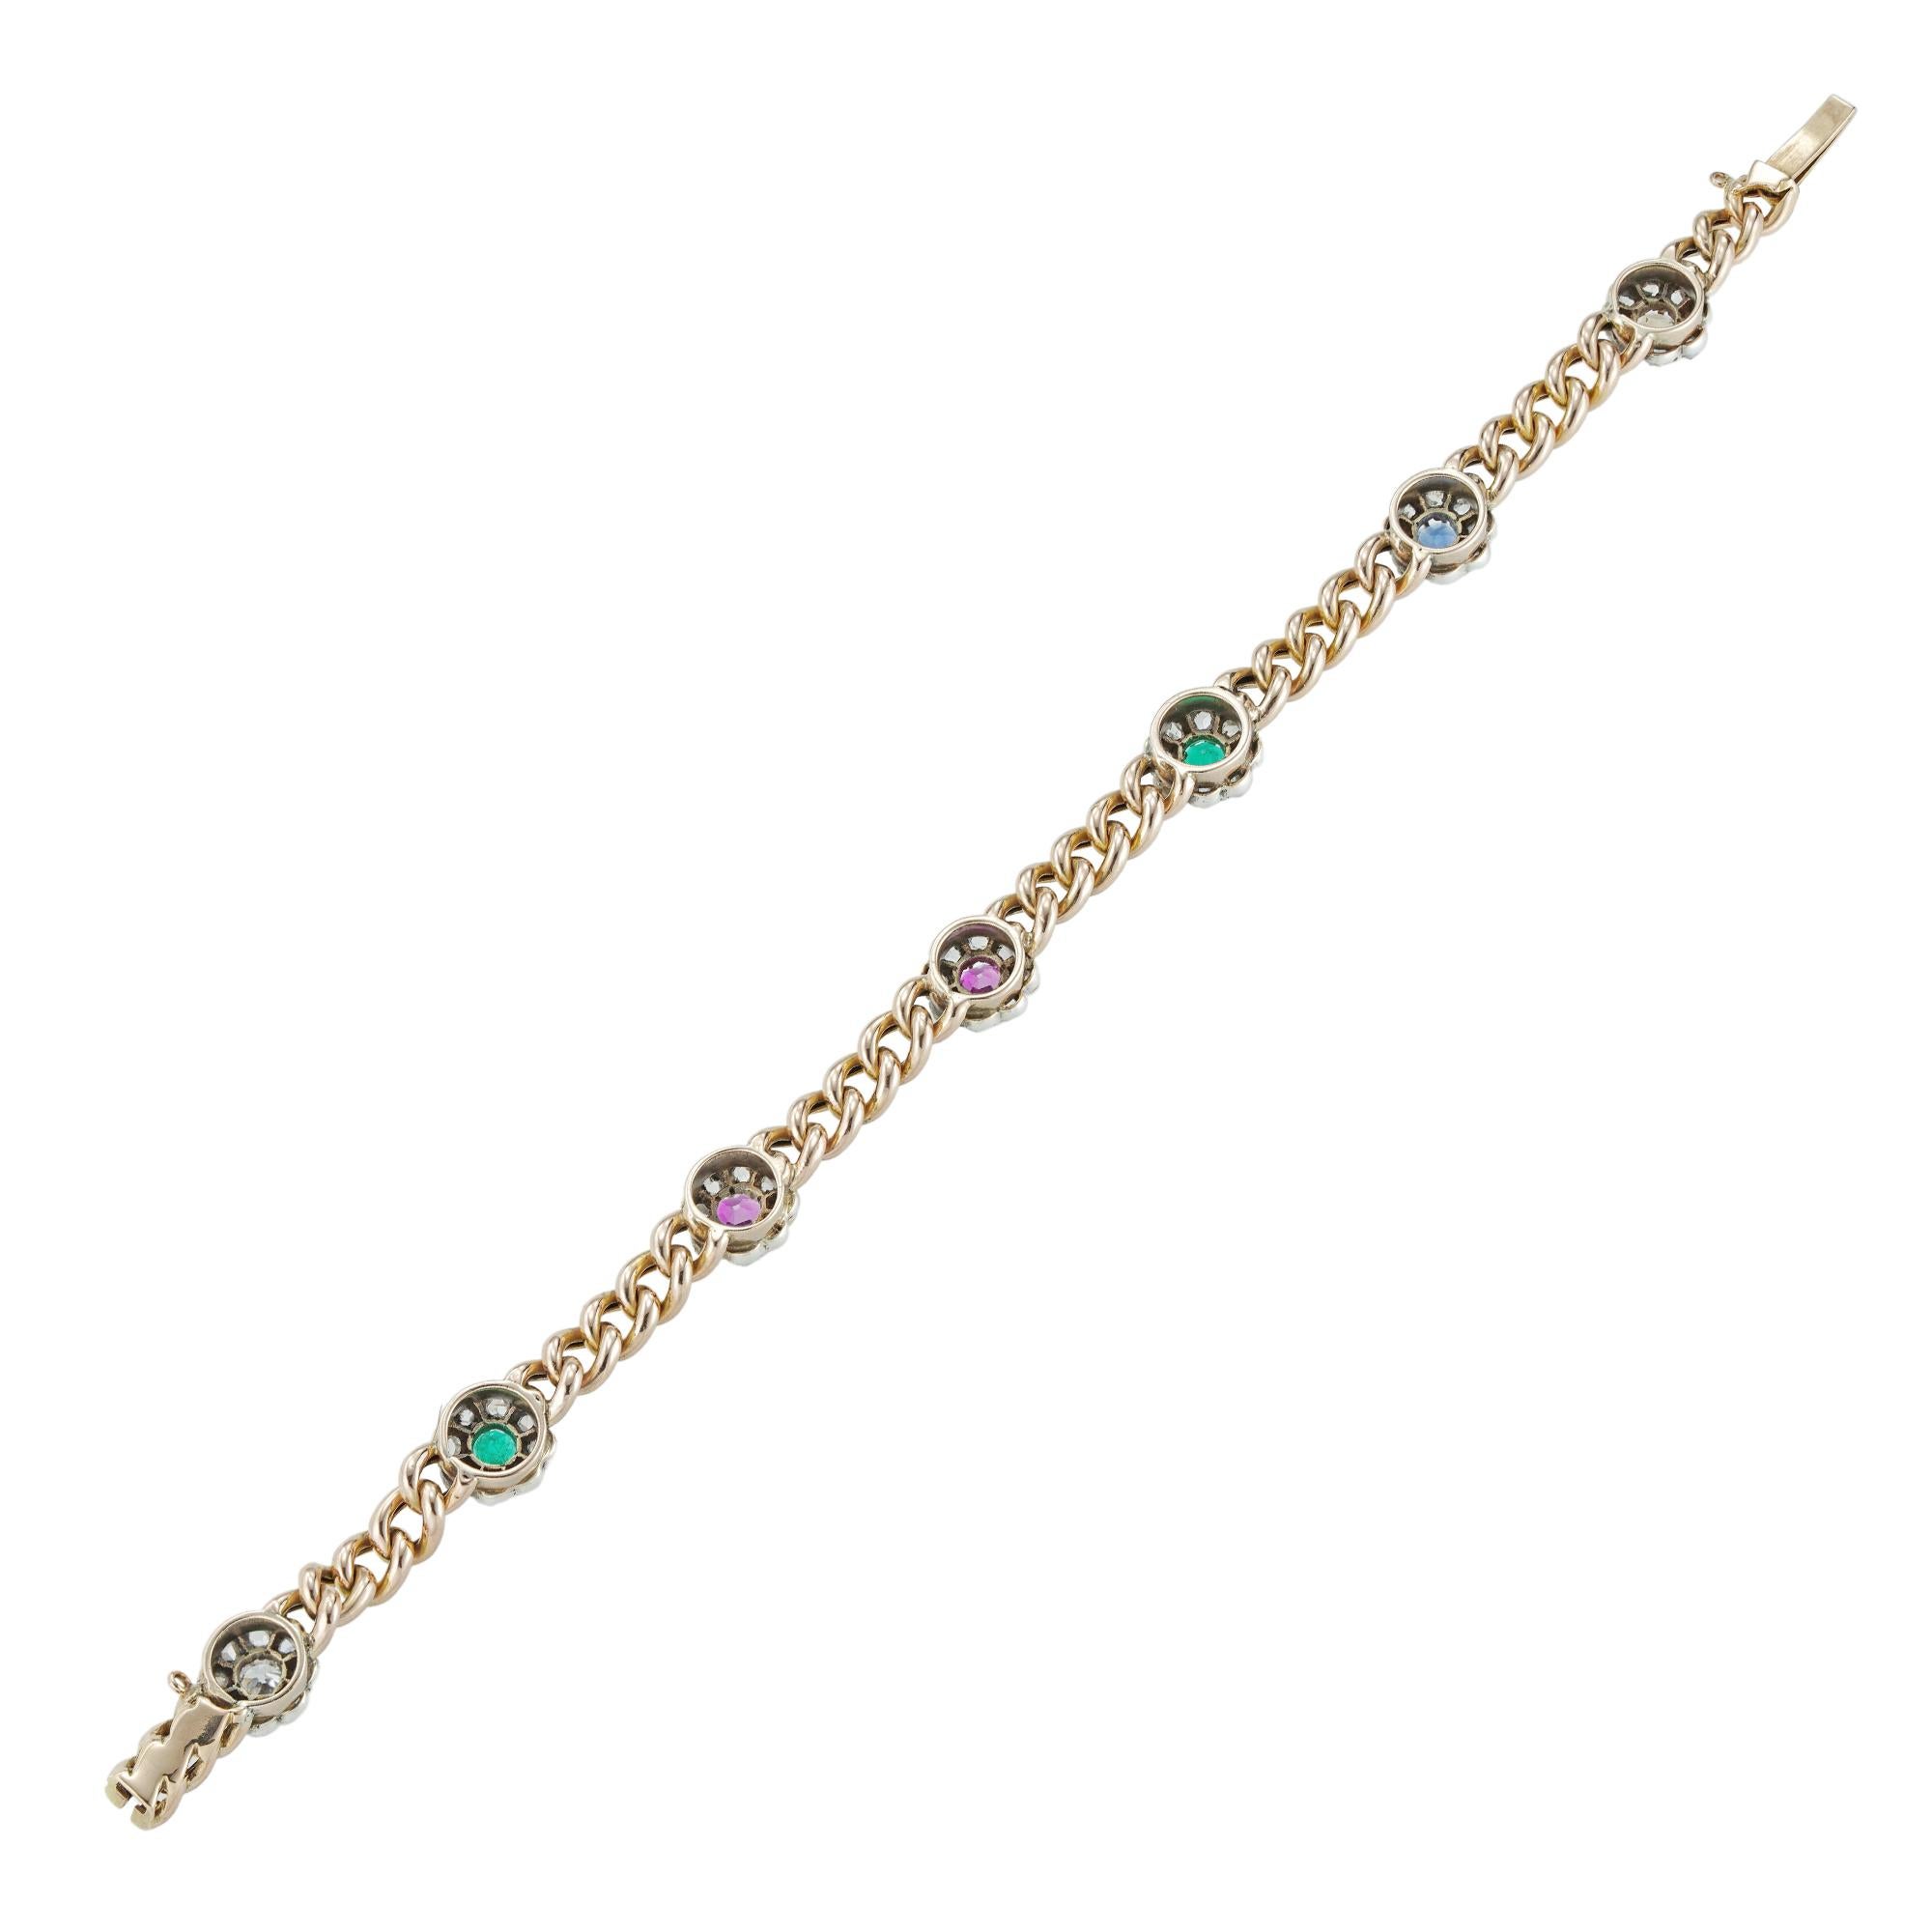 A Victorian multi-gem acrostic bracelet, consisting of seven clusters, each centrally-set with a round faceted stone, a diamond, an emerald, and amethyst, a ruby, an emerald, a sapphire and a topaz, the initial of each stone spelling the word